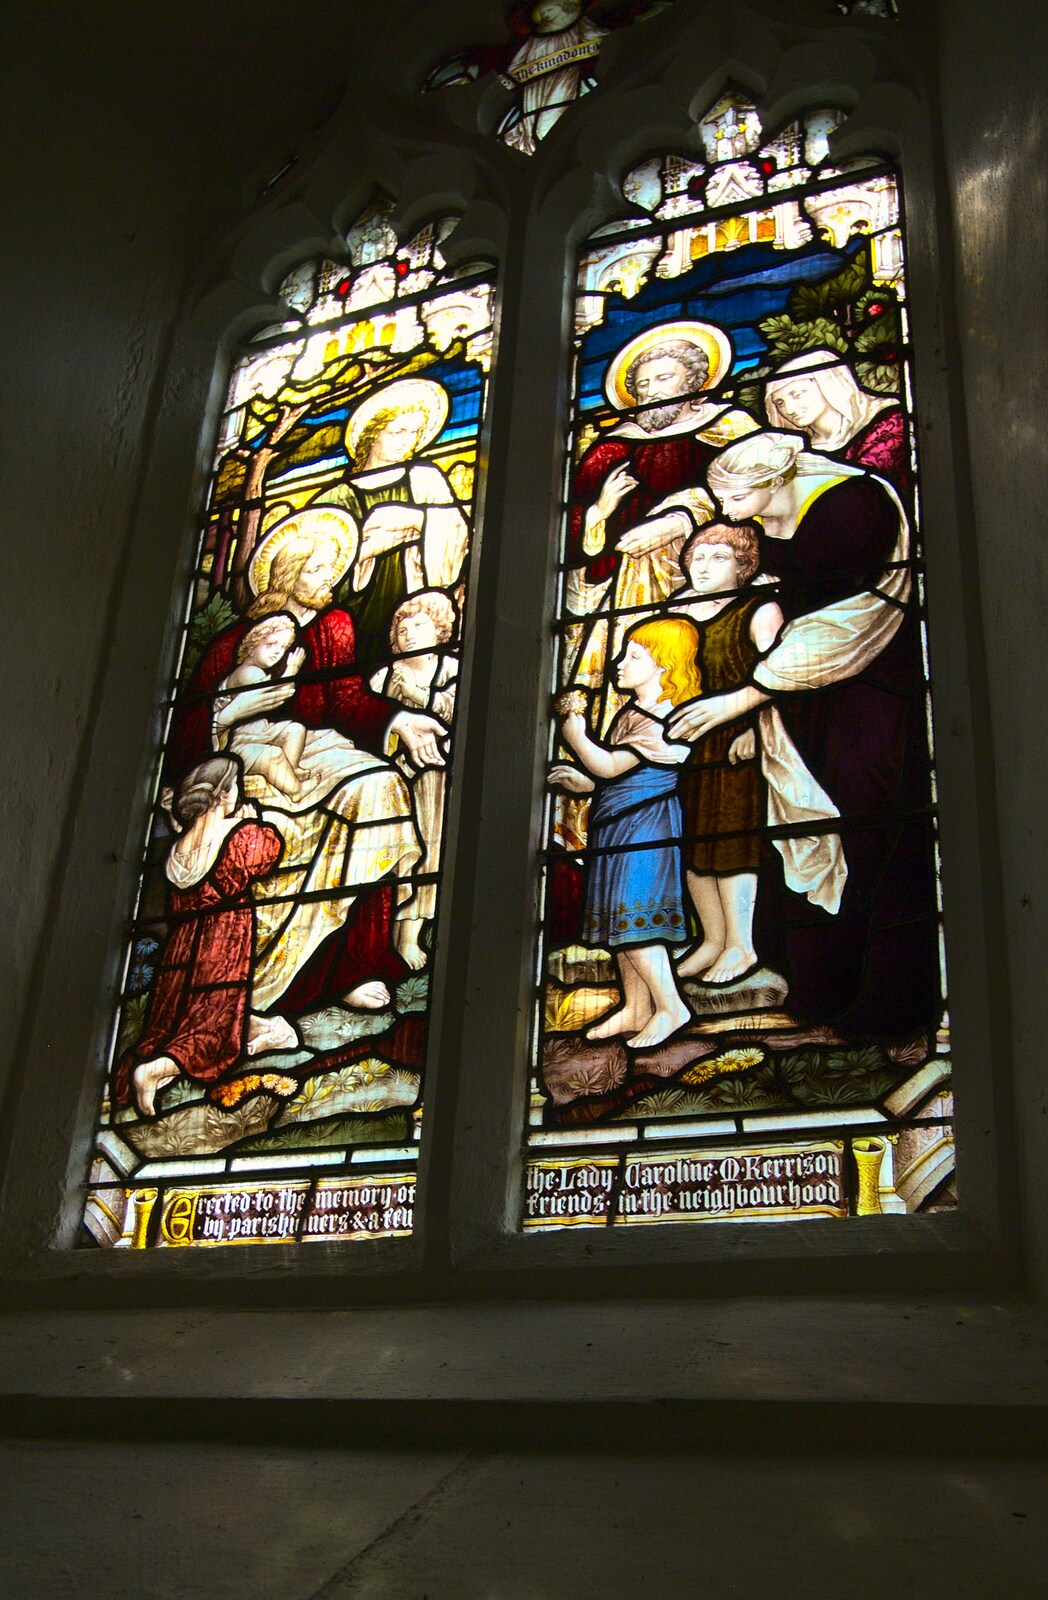 More old stained glass from Charles and the Royal Wedding, Brome, Suffolk - 24th April 2011